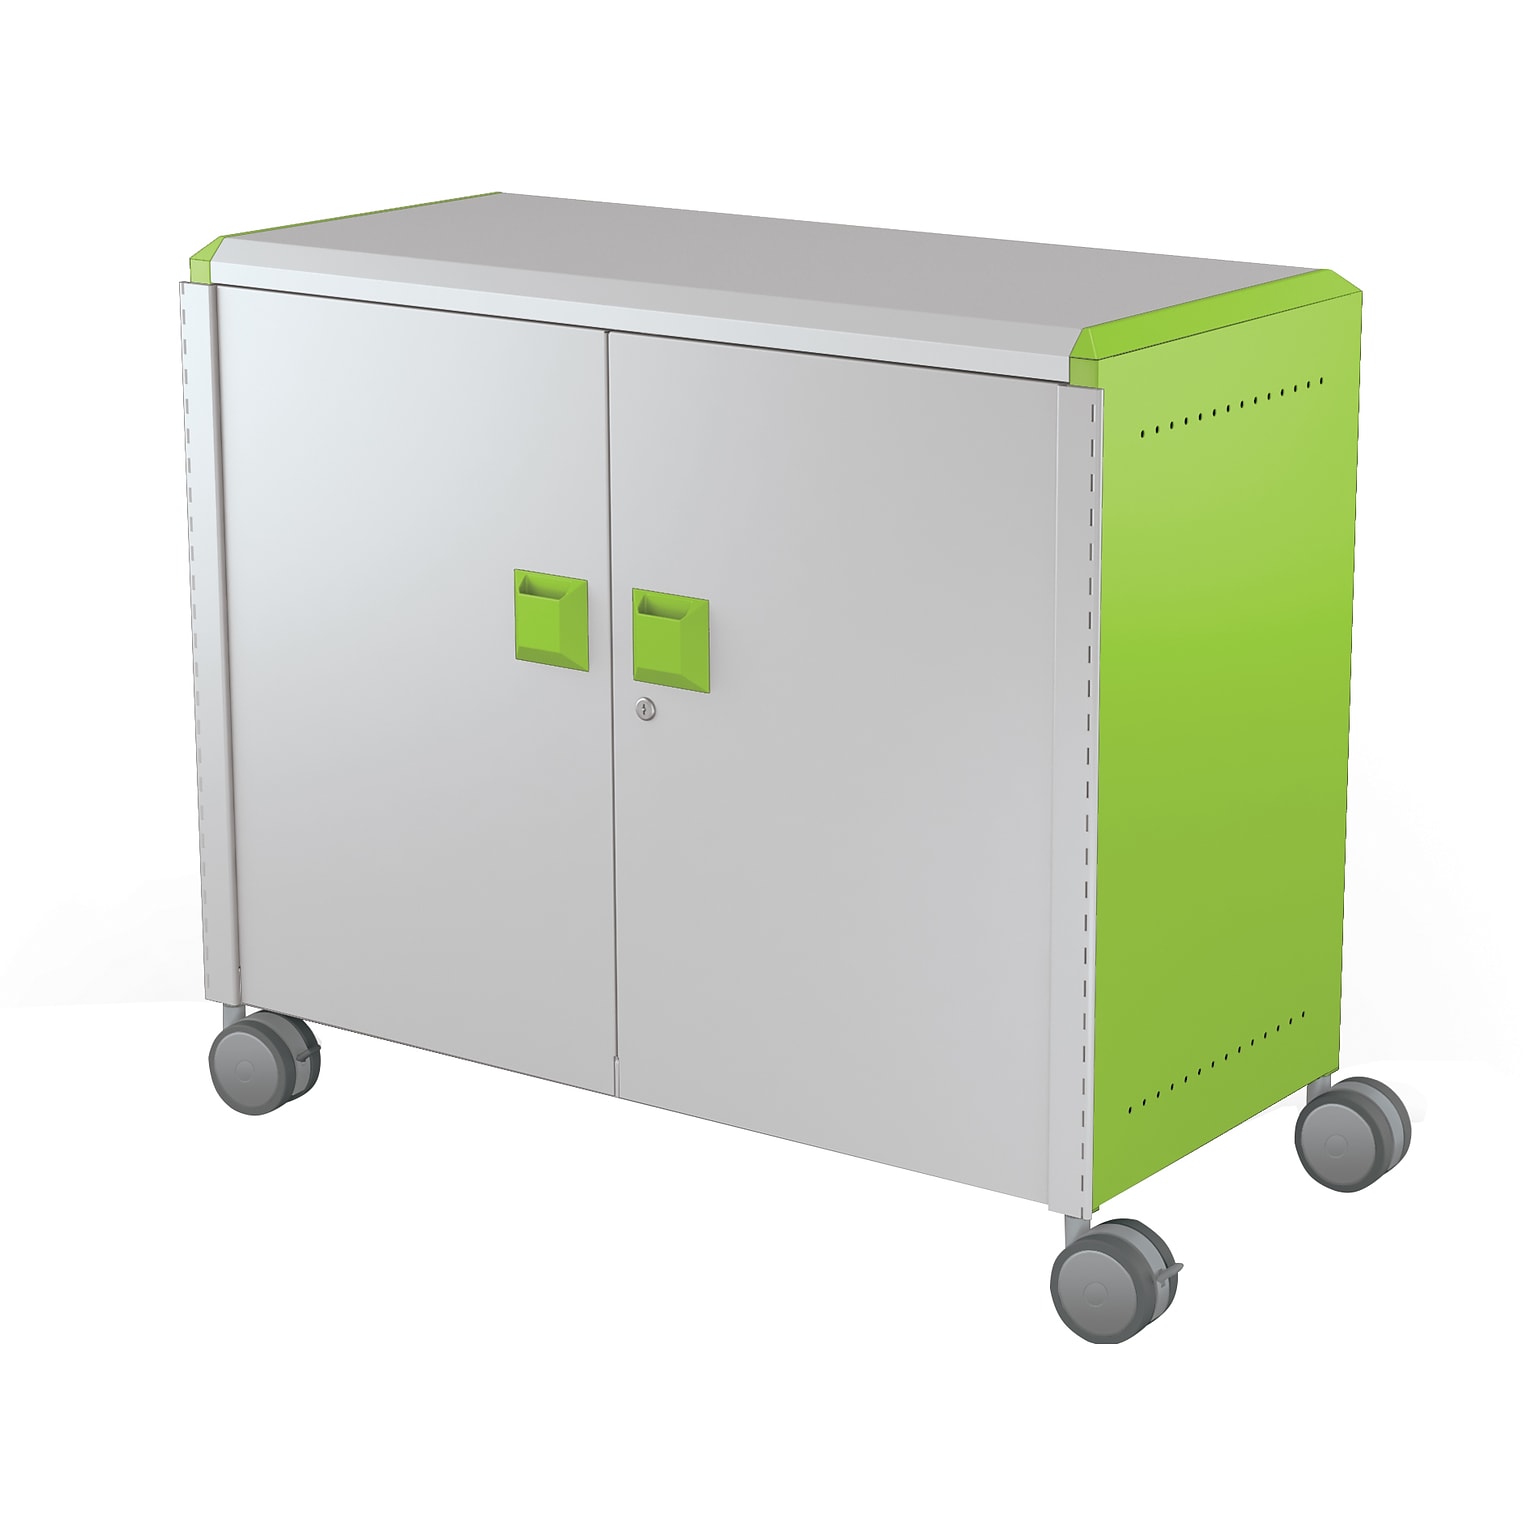 MooreCo Compass Maxi H2 Mobile 9-Section Storage Cabinet, 36.13H x 41.88W x 19.13D, Platinum/Green Metal (B3A1F2E1X0)